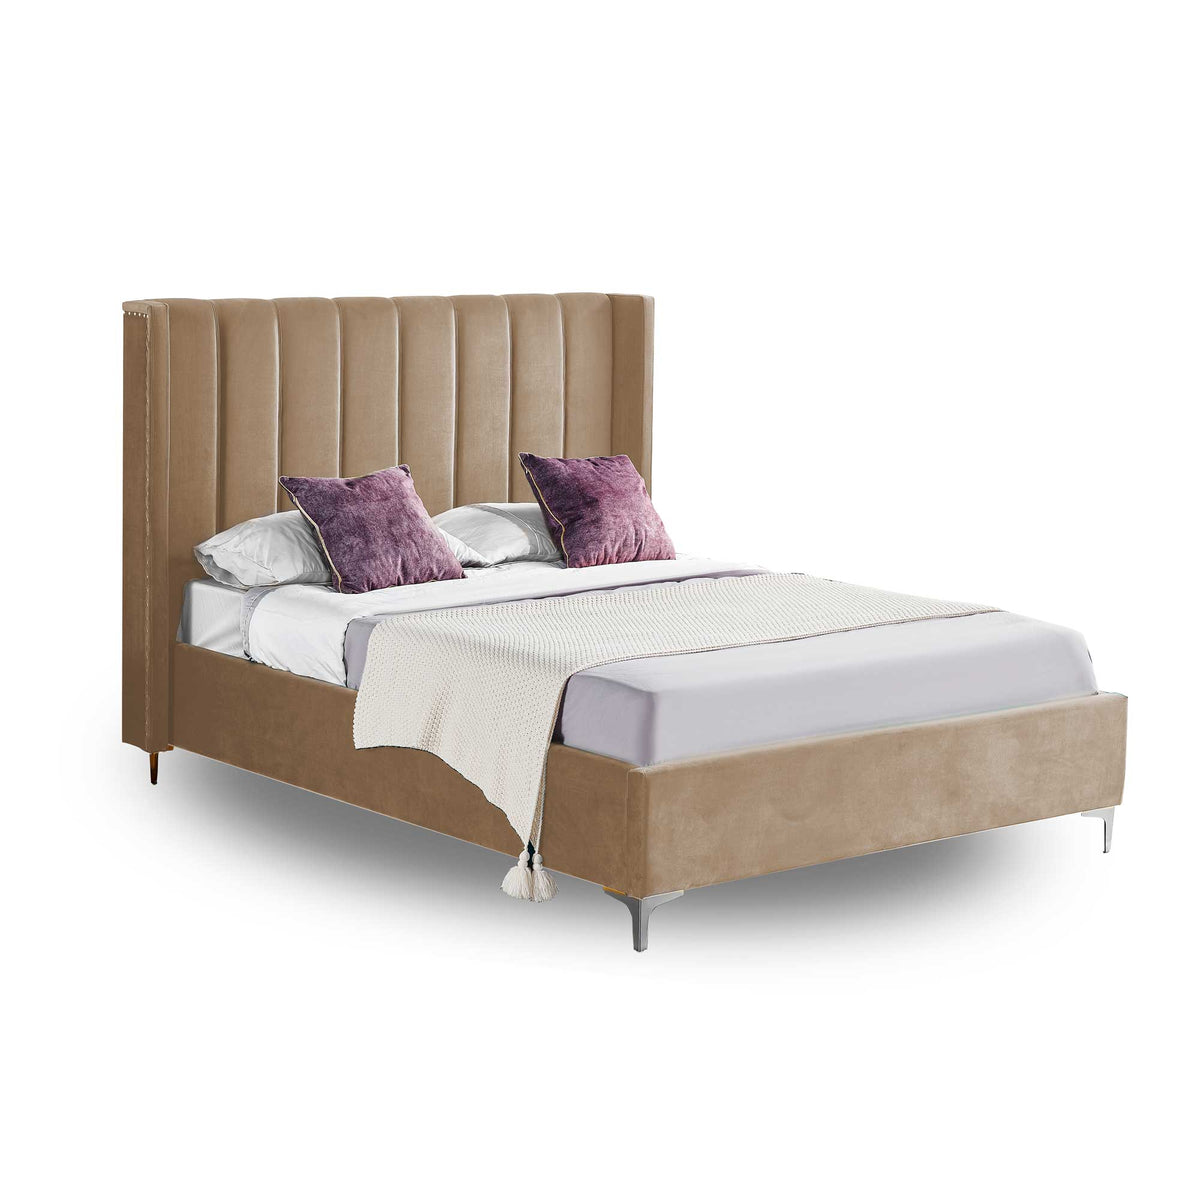 Colorado Champagne Bed Frame - 2 Sizes Available